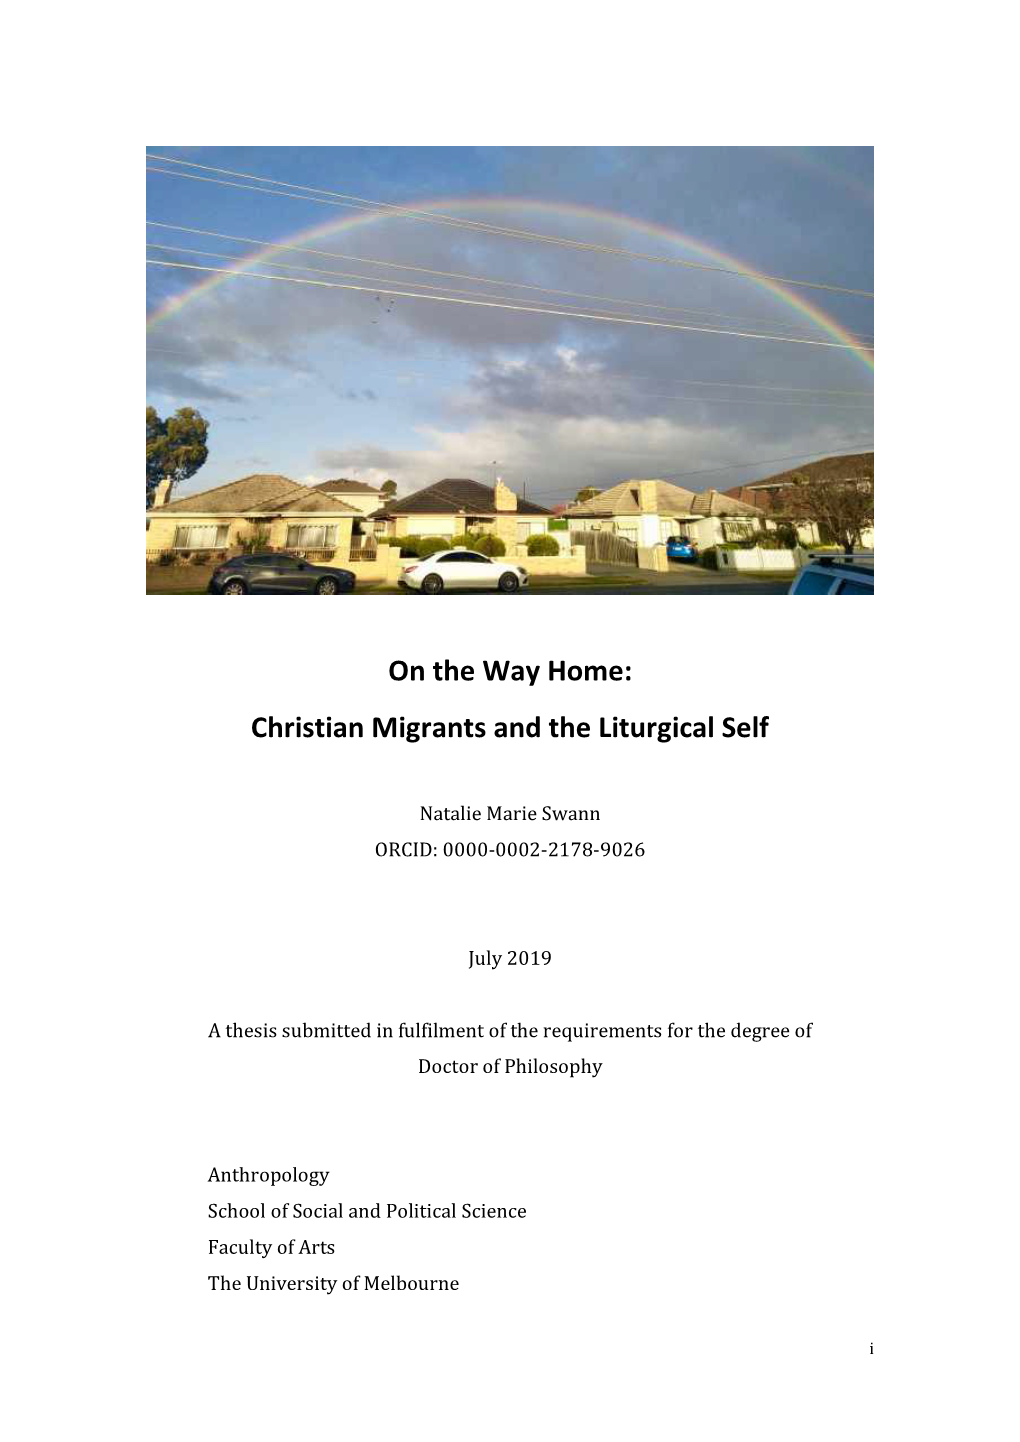 On the Way Home: Christian Migrants and the Liturgical Self